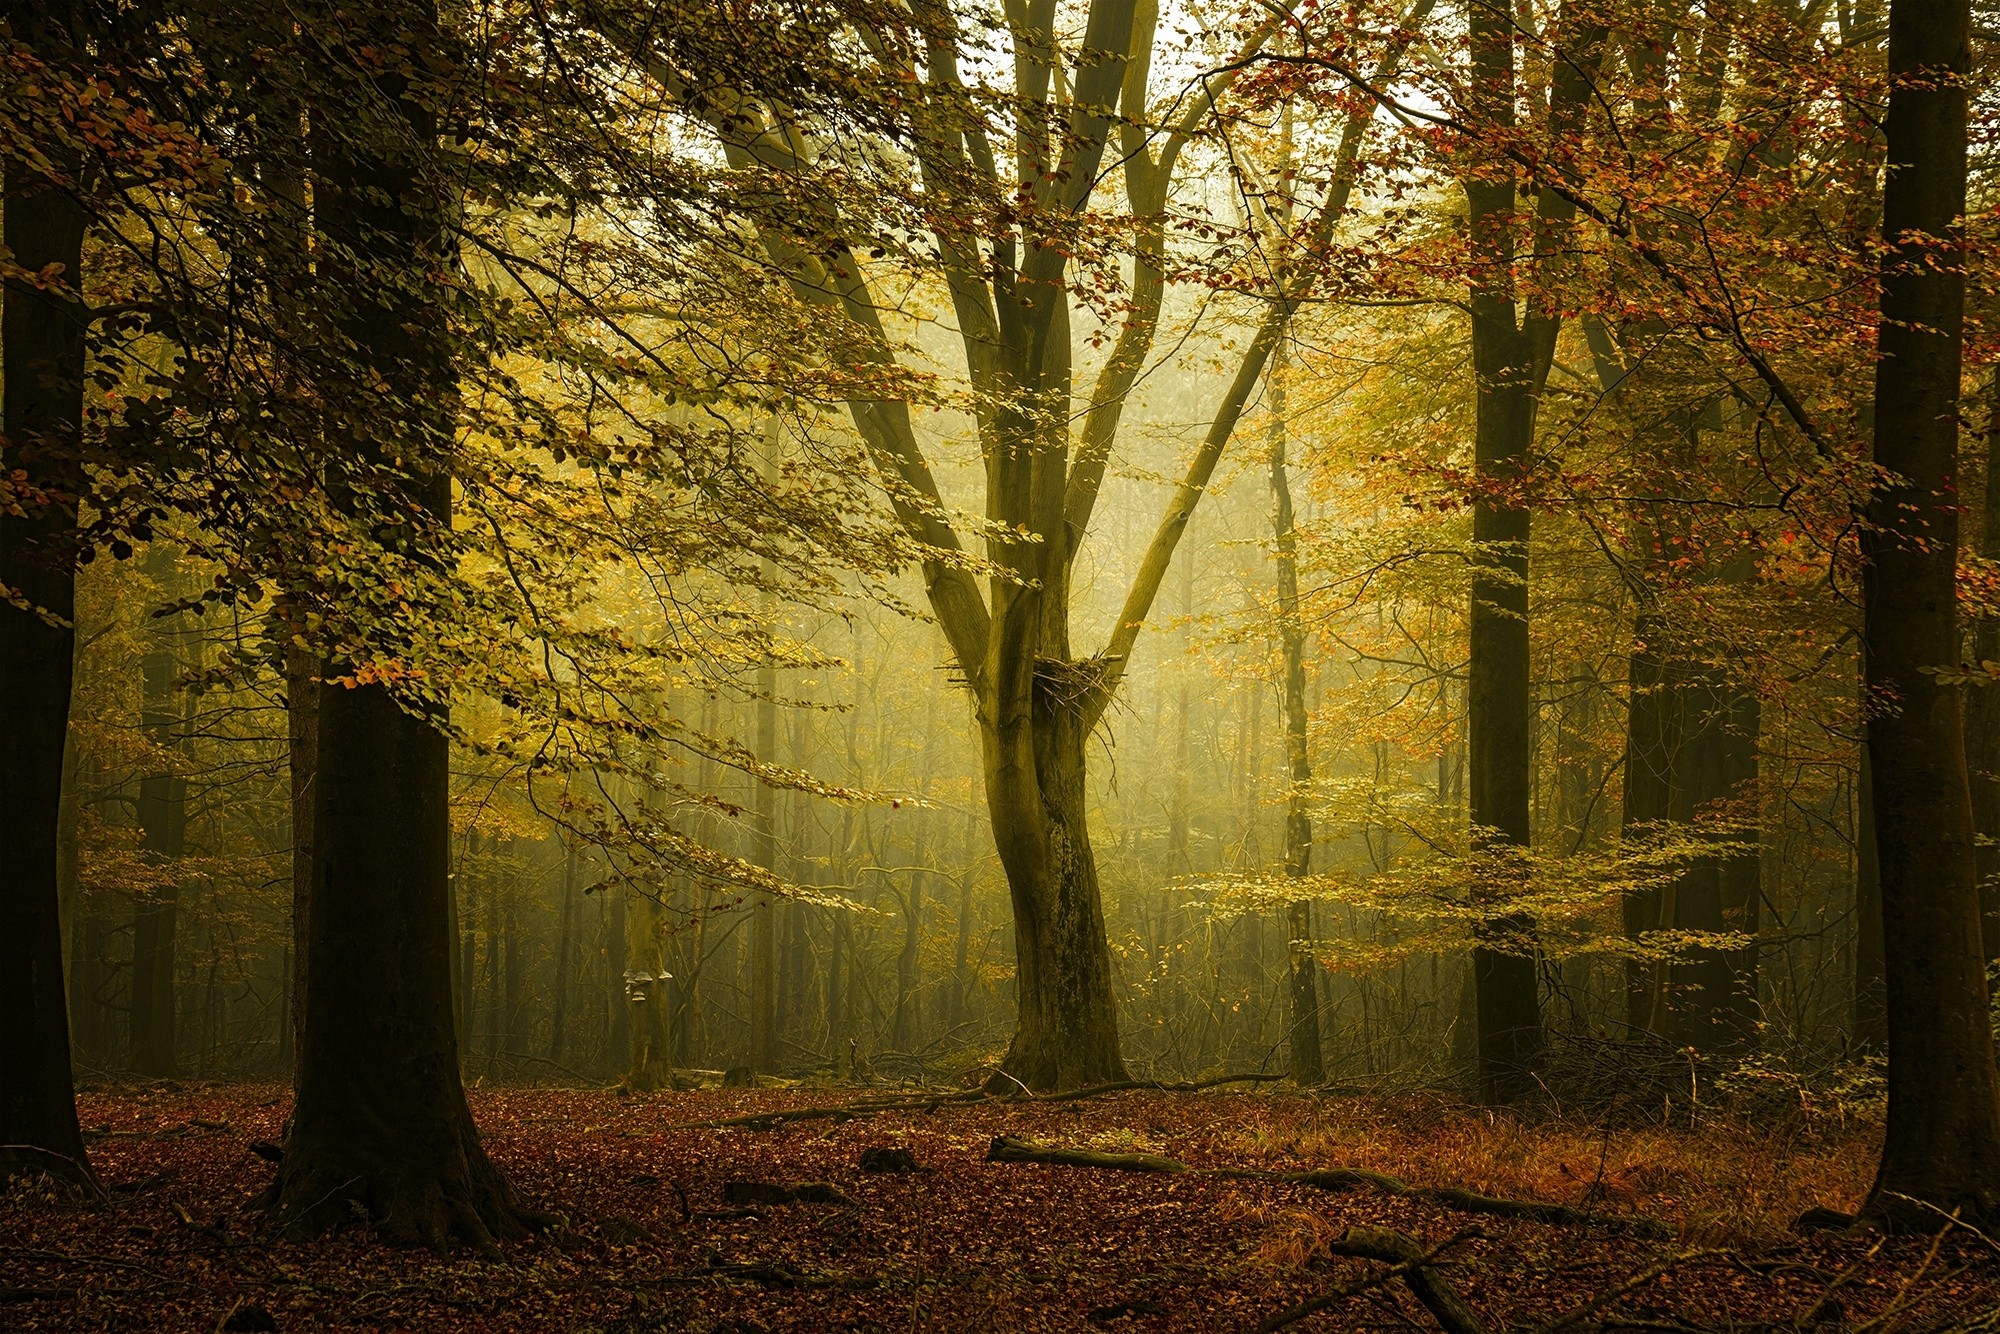 General 2000x1334 nature fall forest sunlight mist leaves calm trees Netherlands